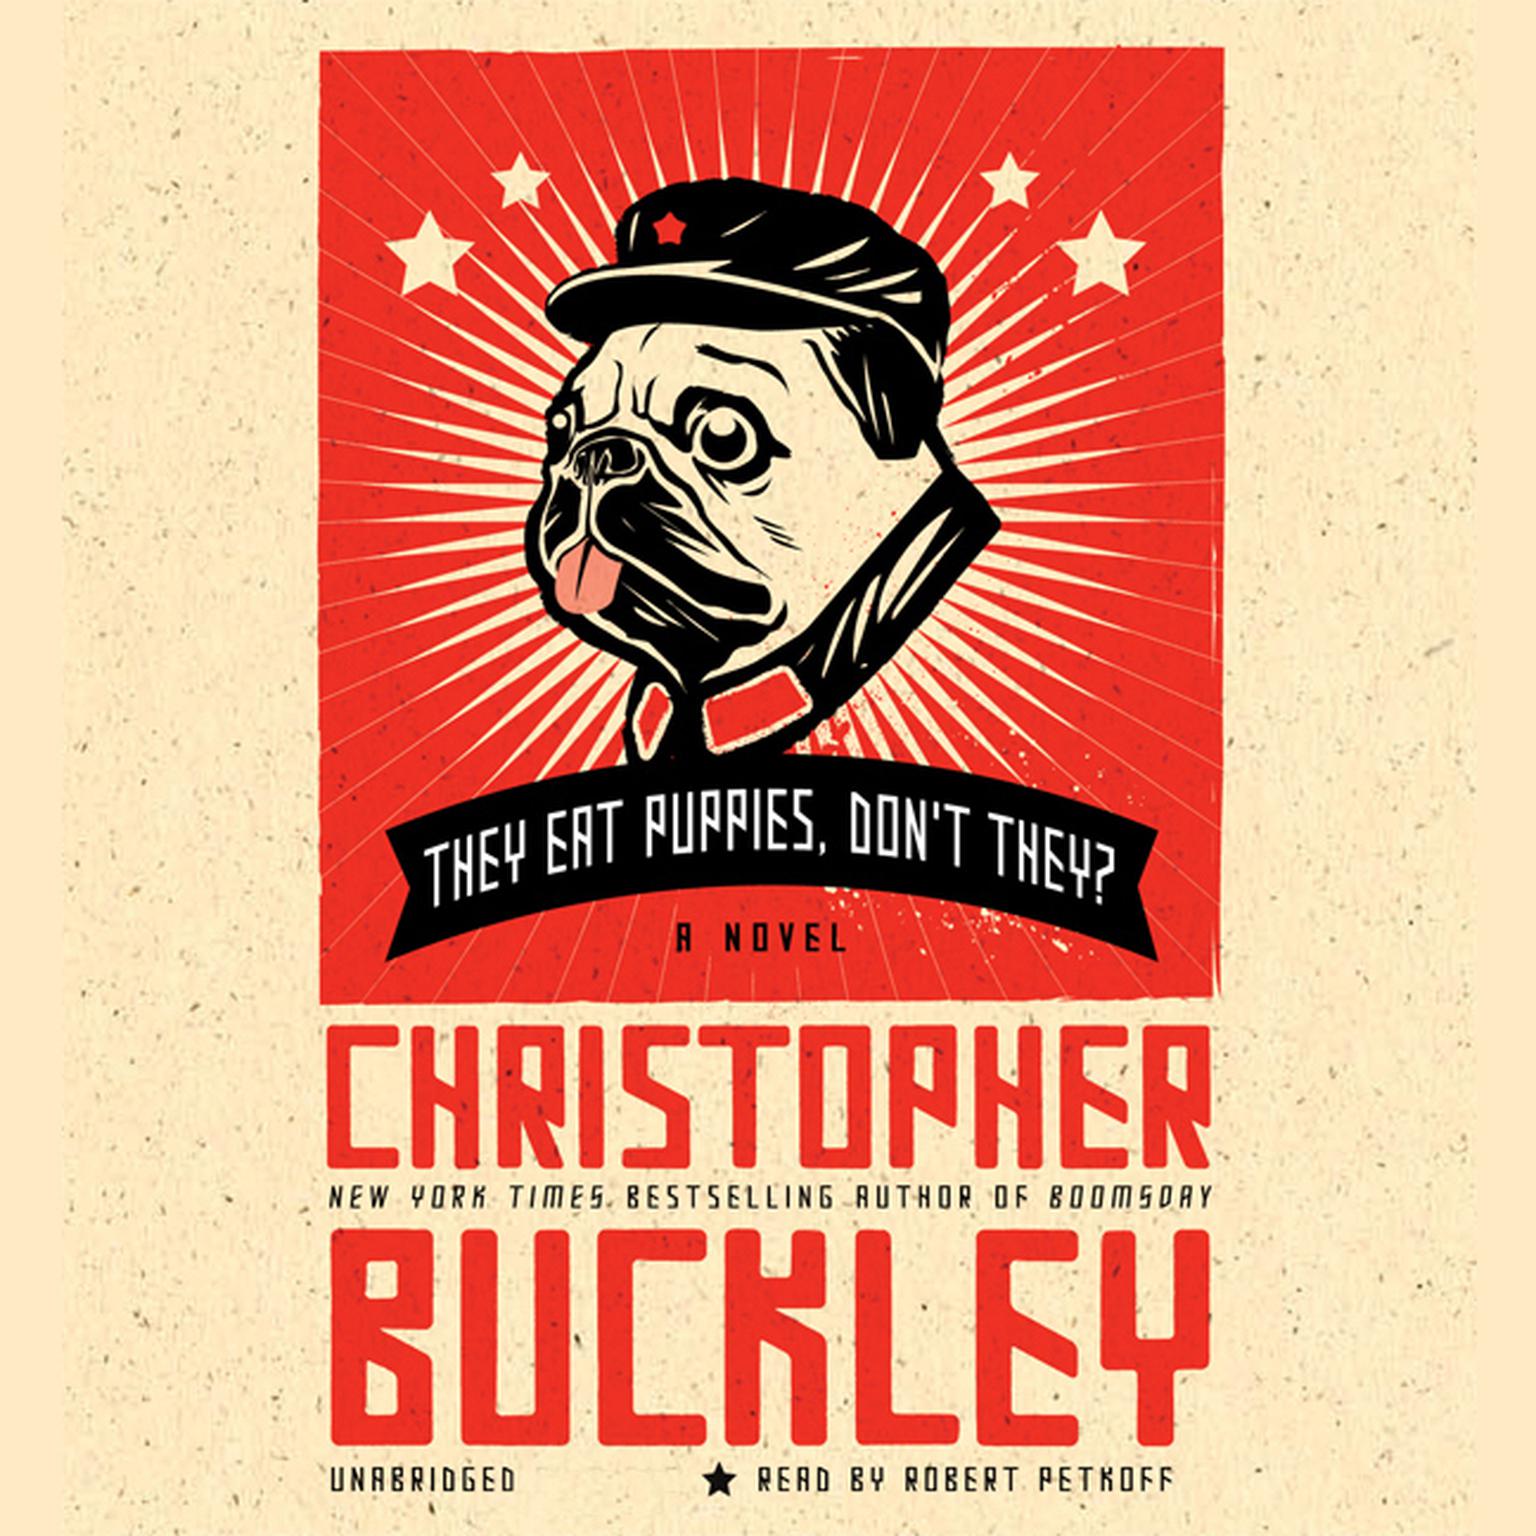 They Eat Puppies, Dont They?: A Novel Audiobook, by Christopher Buckley